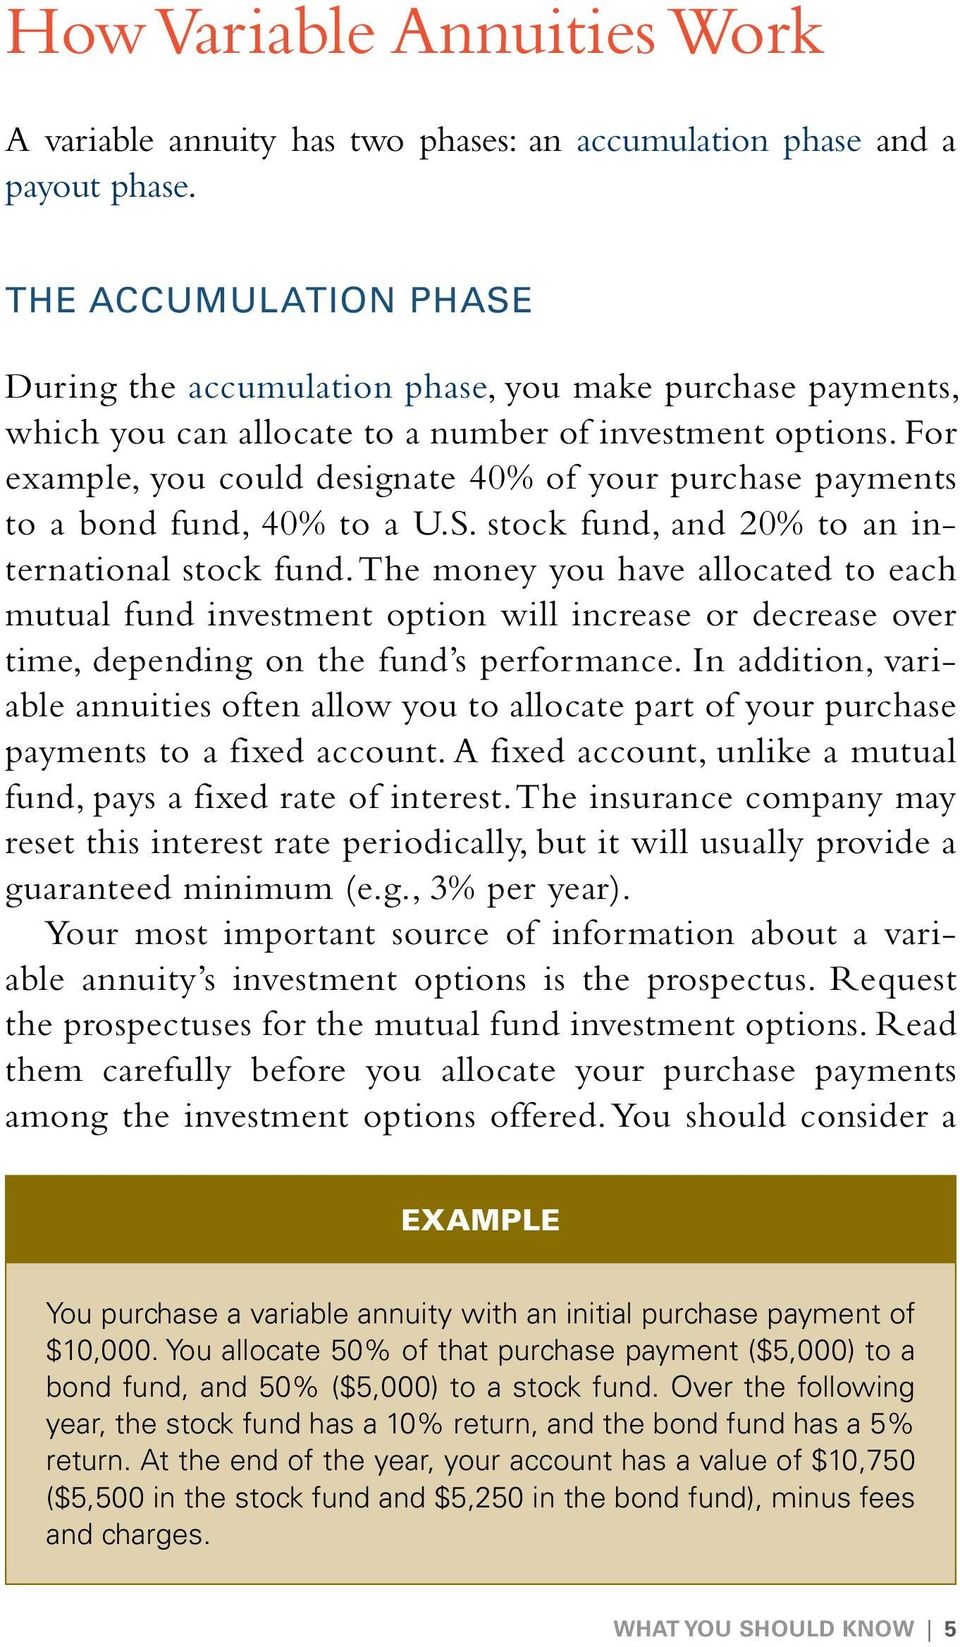 For example, you could designate 40% of your purchase payments to a bond fund, 40% to a U.S. stock fund, and 20% to an international stock fund.